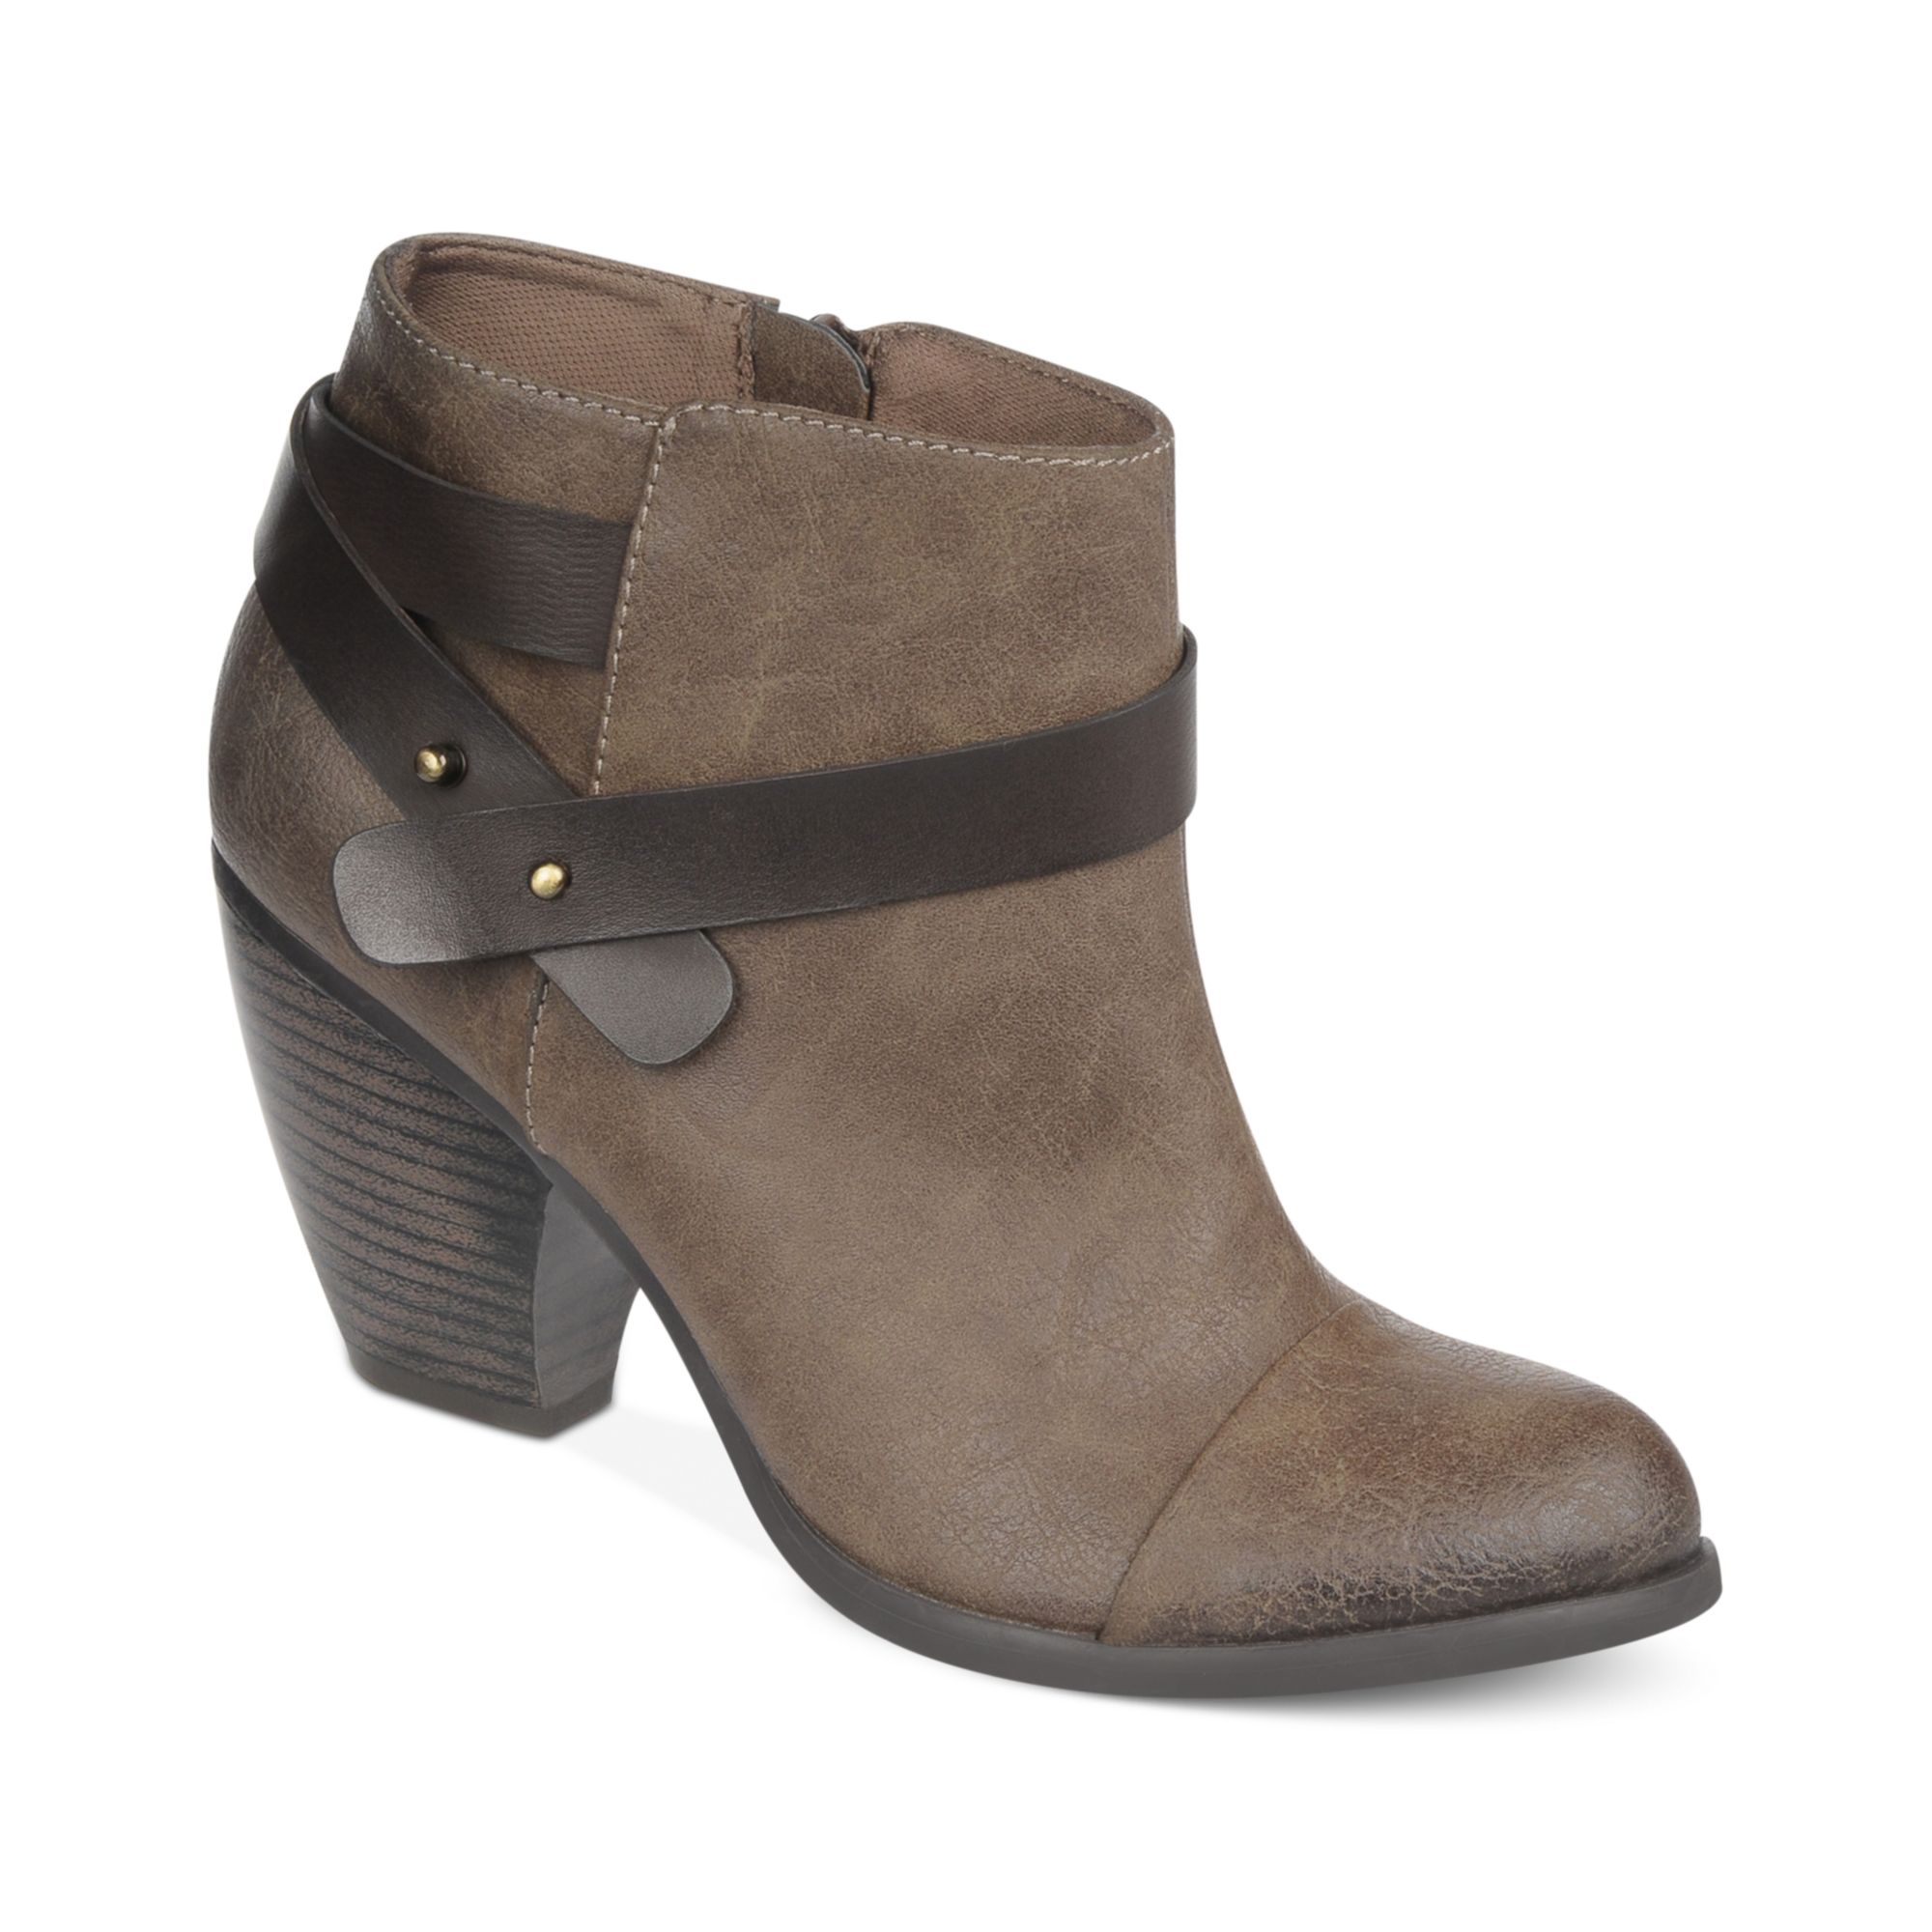 Lyst - Fergie Fergalicious Boots Lucid Booties in Brown